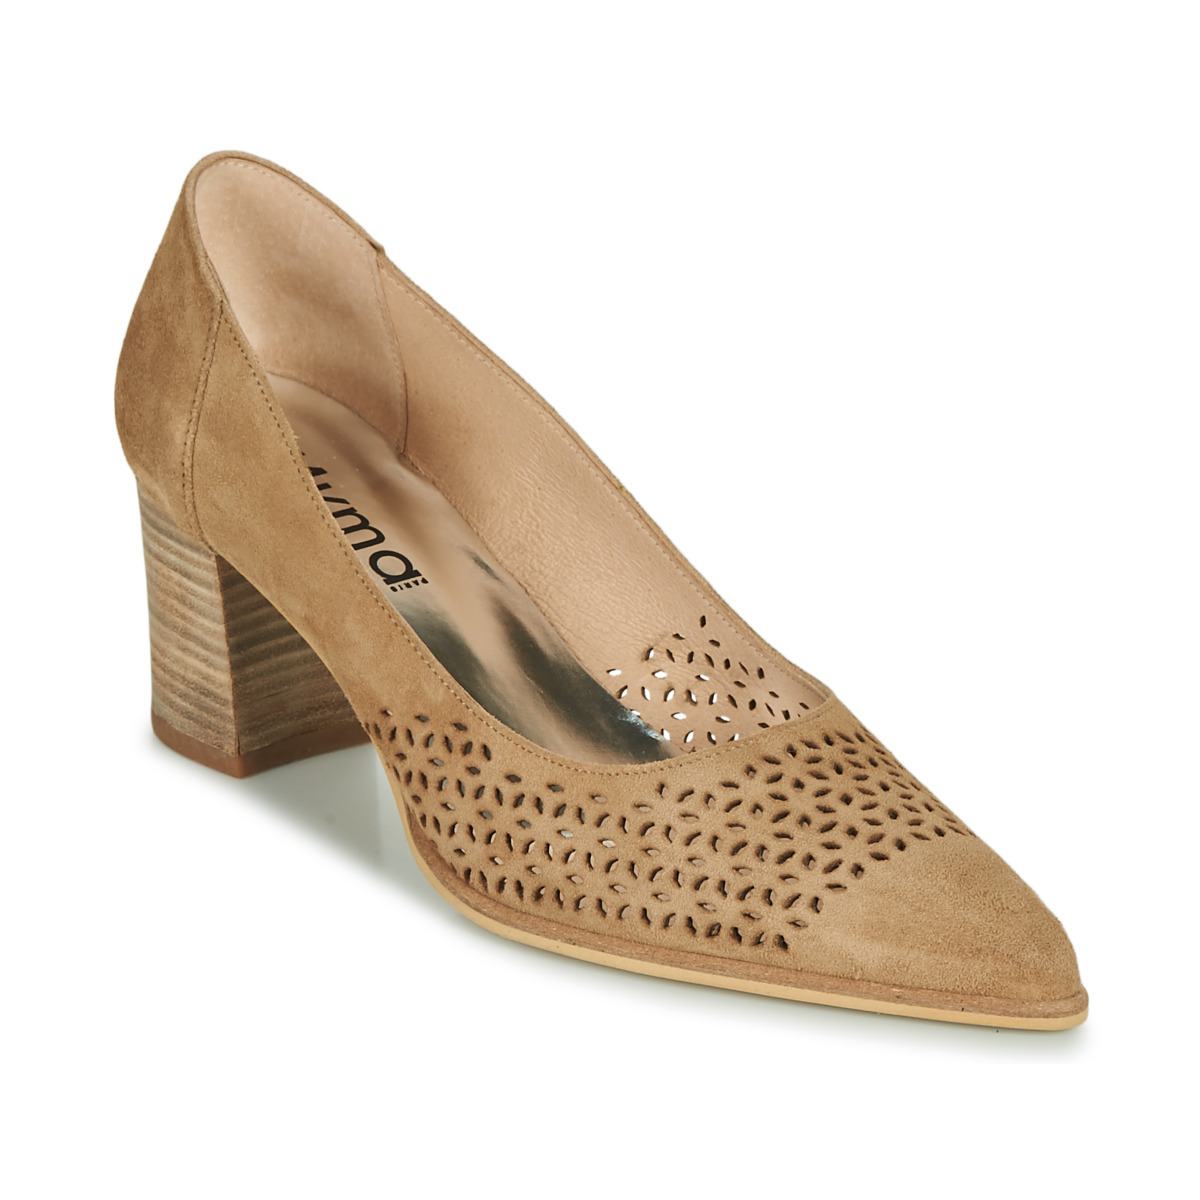 Myma - Pumps in Brown for Women at Spartoo GOOFASH